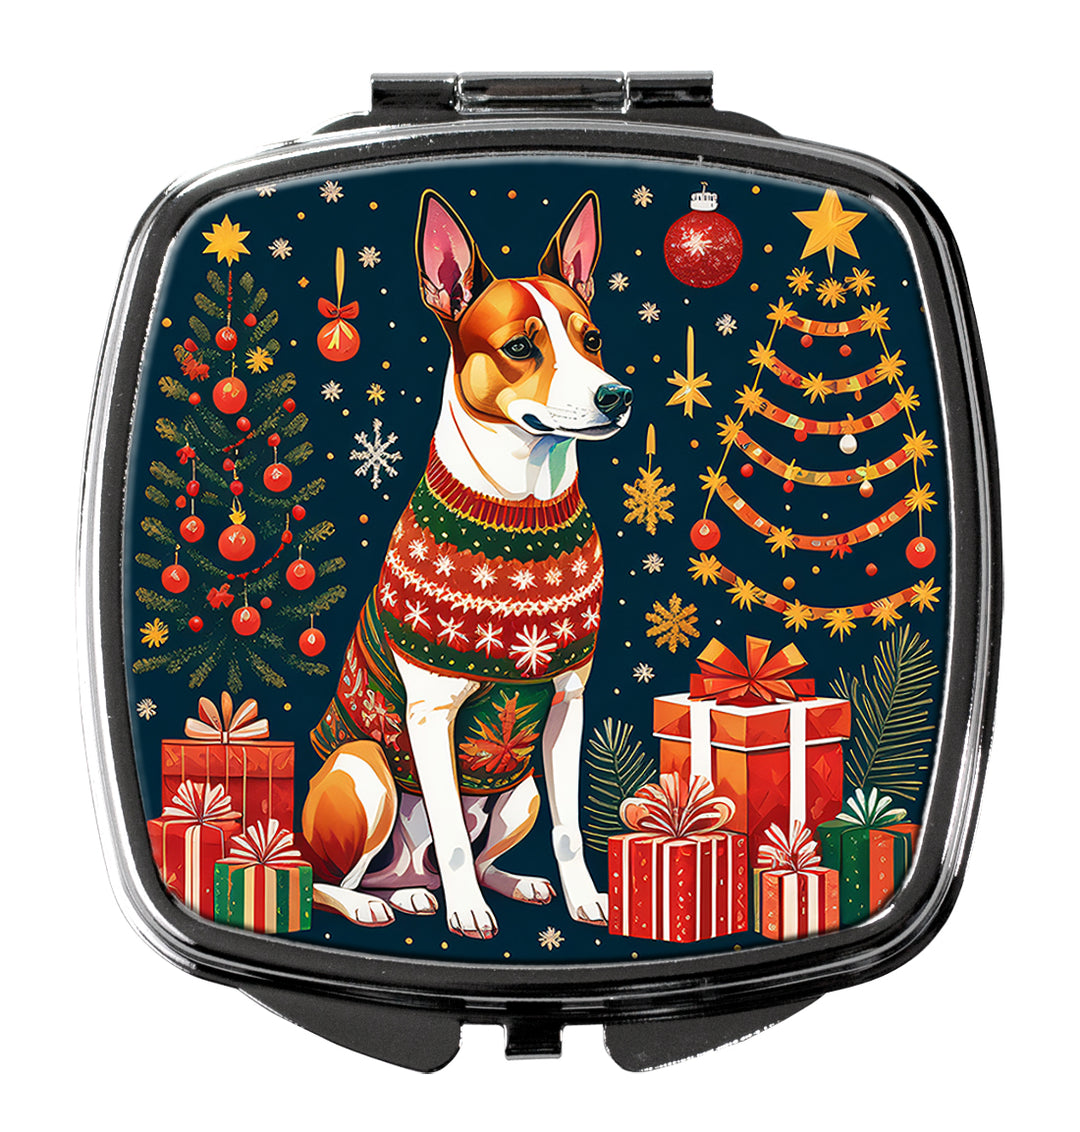 Yorkie Yorkshire Terrier Christmas Compact Mirror Image 10